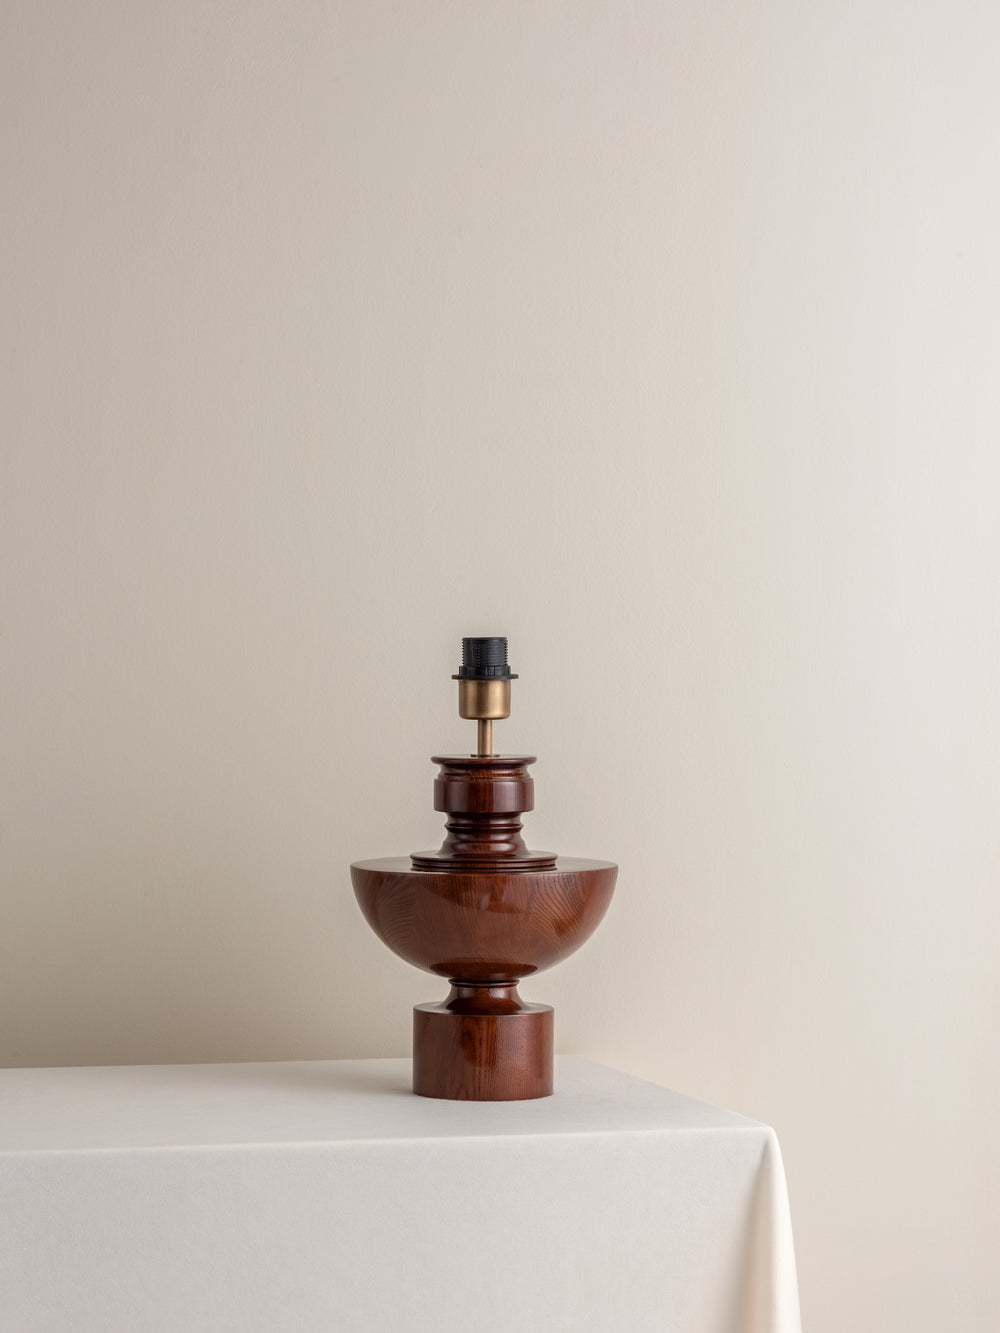 Editions spun wood lamp with + walnut wood shade | Table Lamp | Lights & Lamps | UK | Modern Affordable Designer Lighting